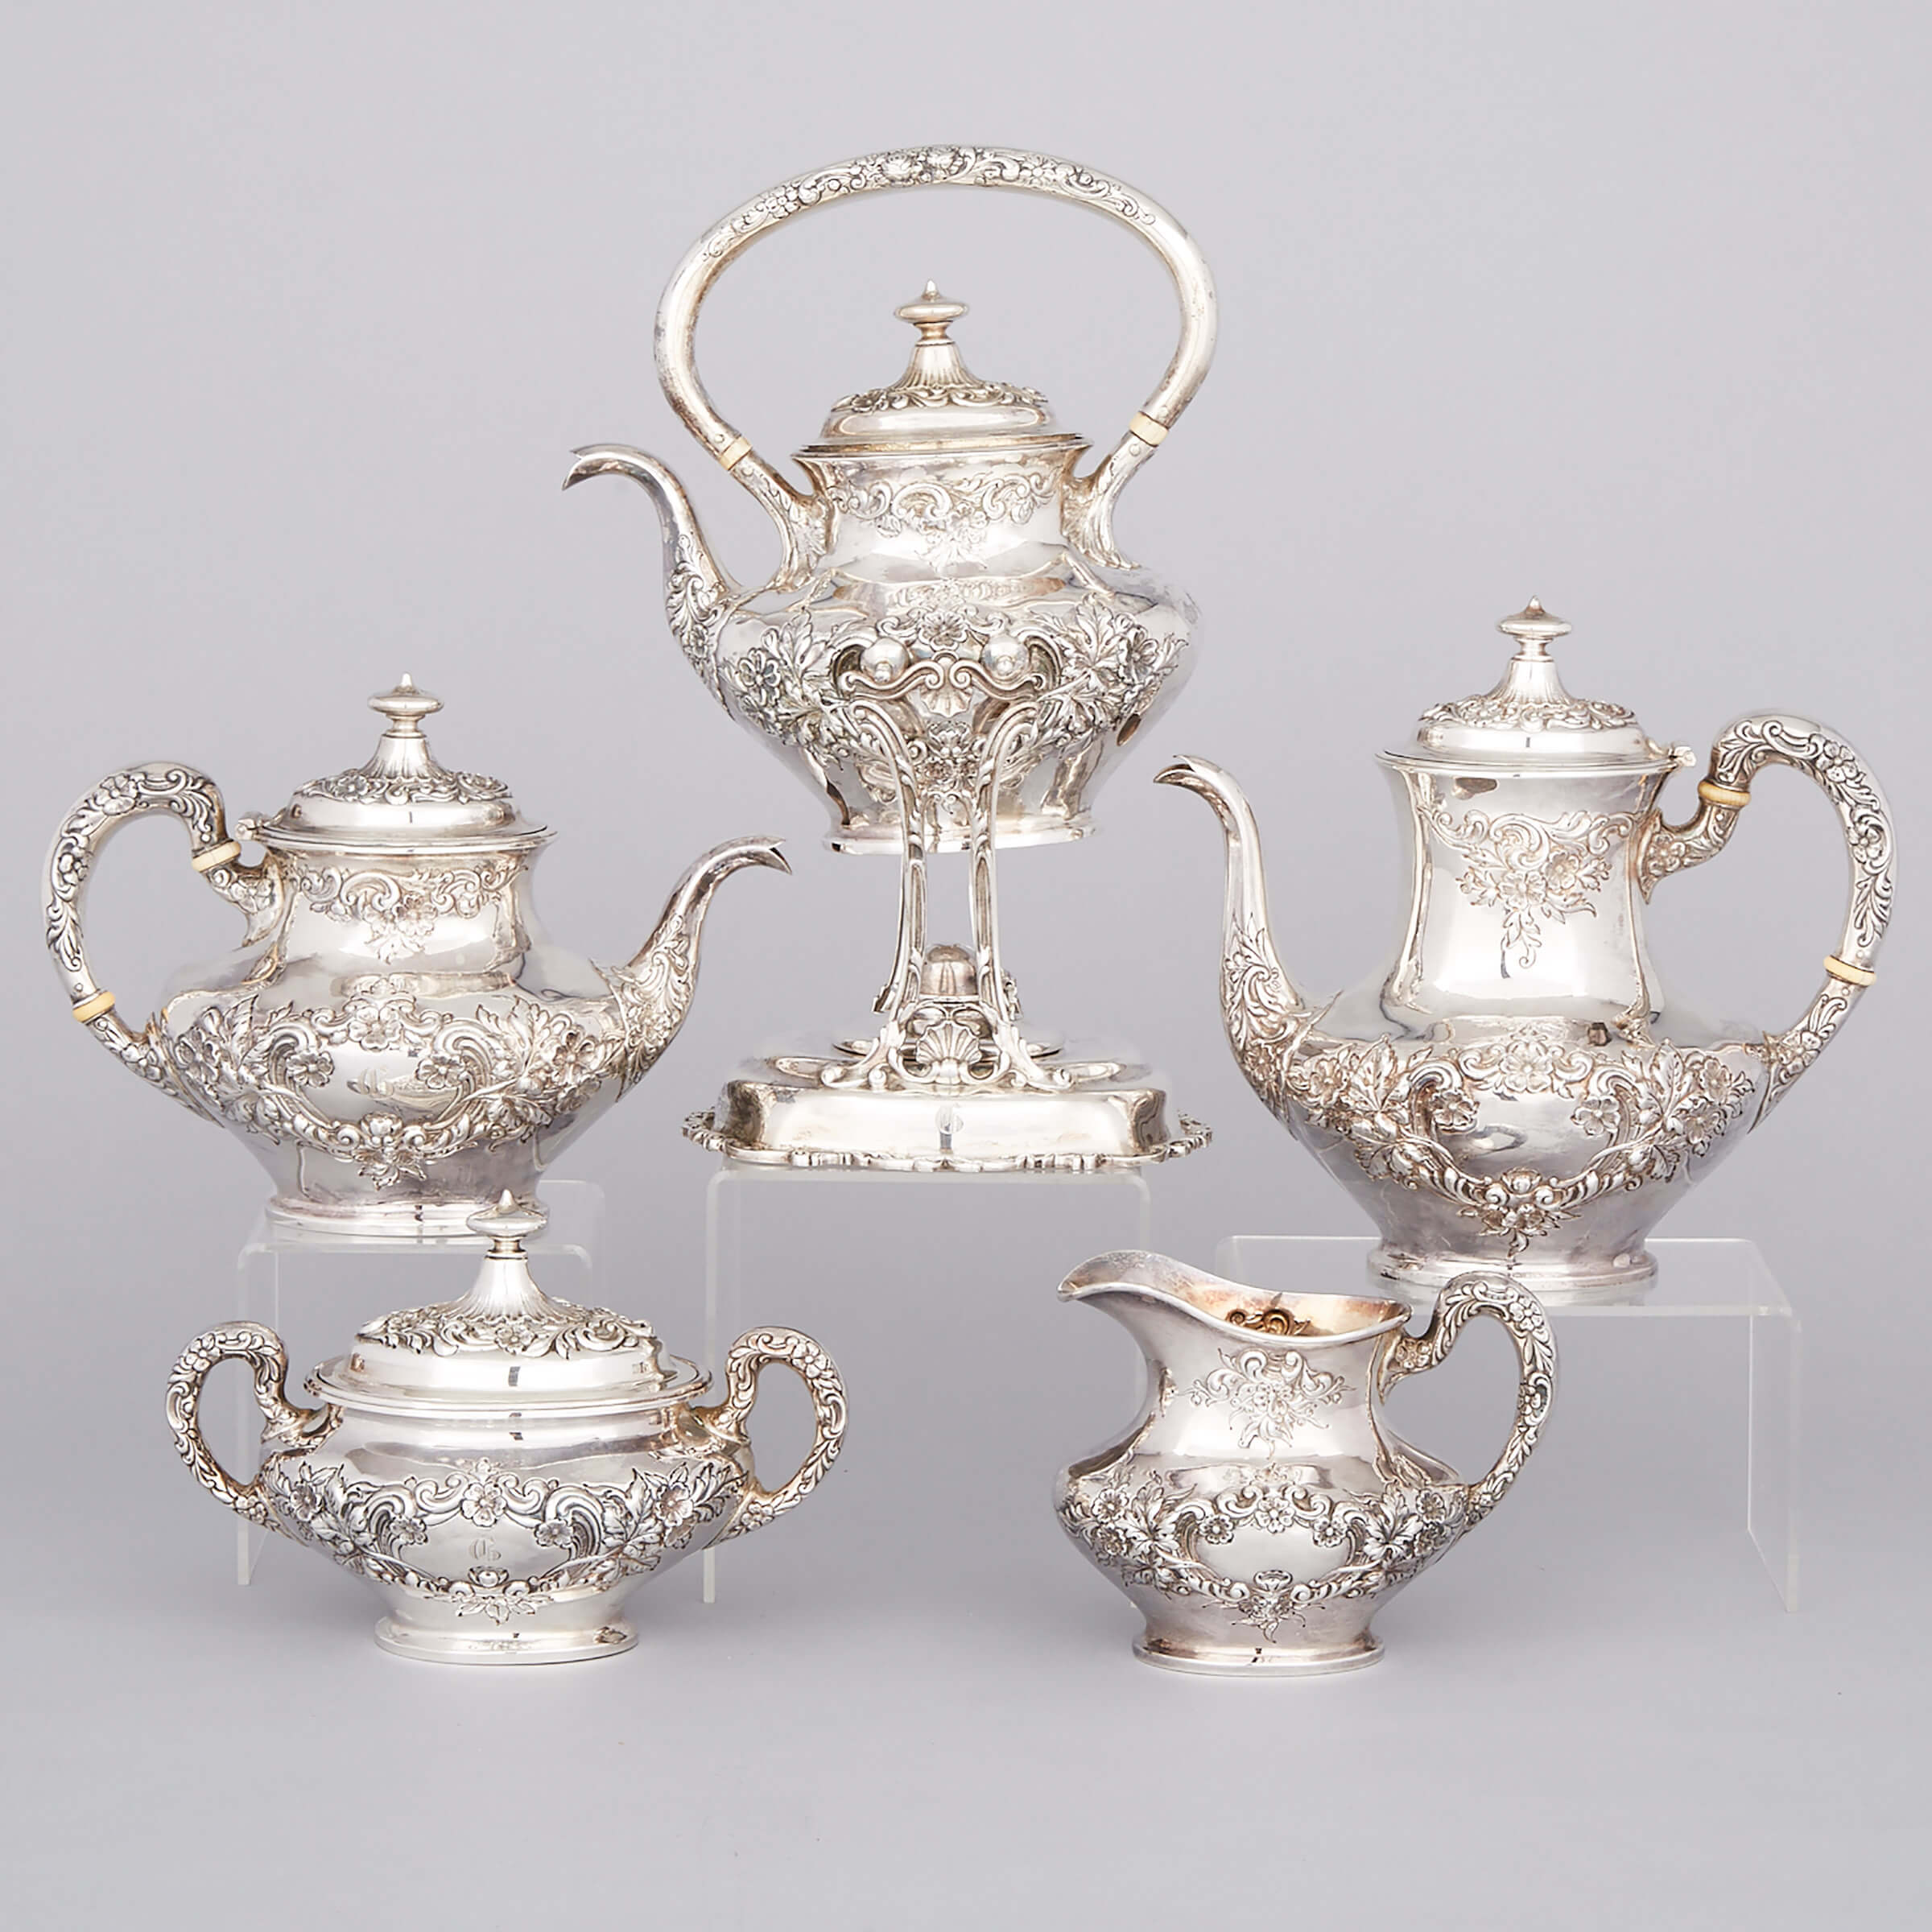 Canadian Silver Tea and Coffee Service, Henry Birks & Sons, Montreal, Que., c.1904-24